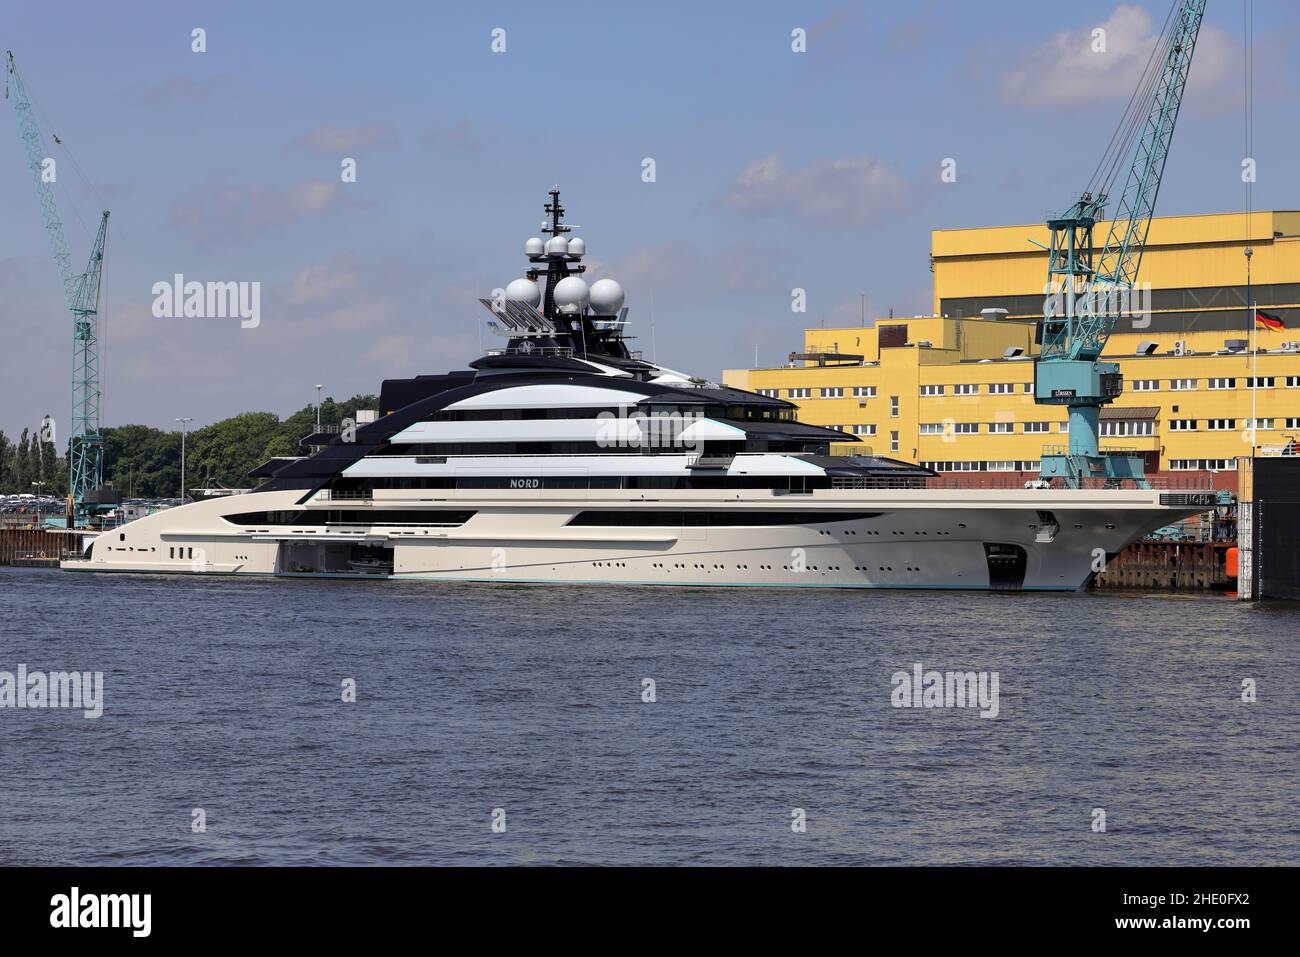 The Meagyacht Nord will be moored in Lemwerder at the shipyard on June 19, 2021. Stock Photo